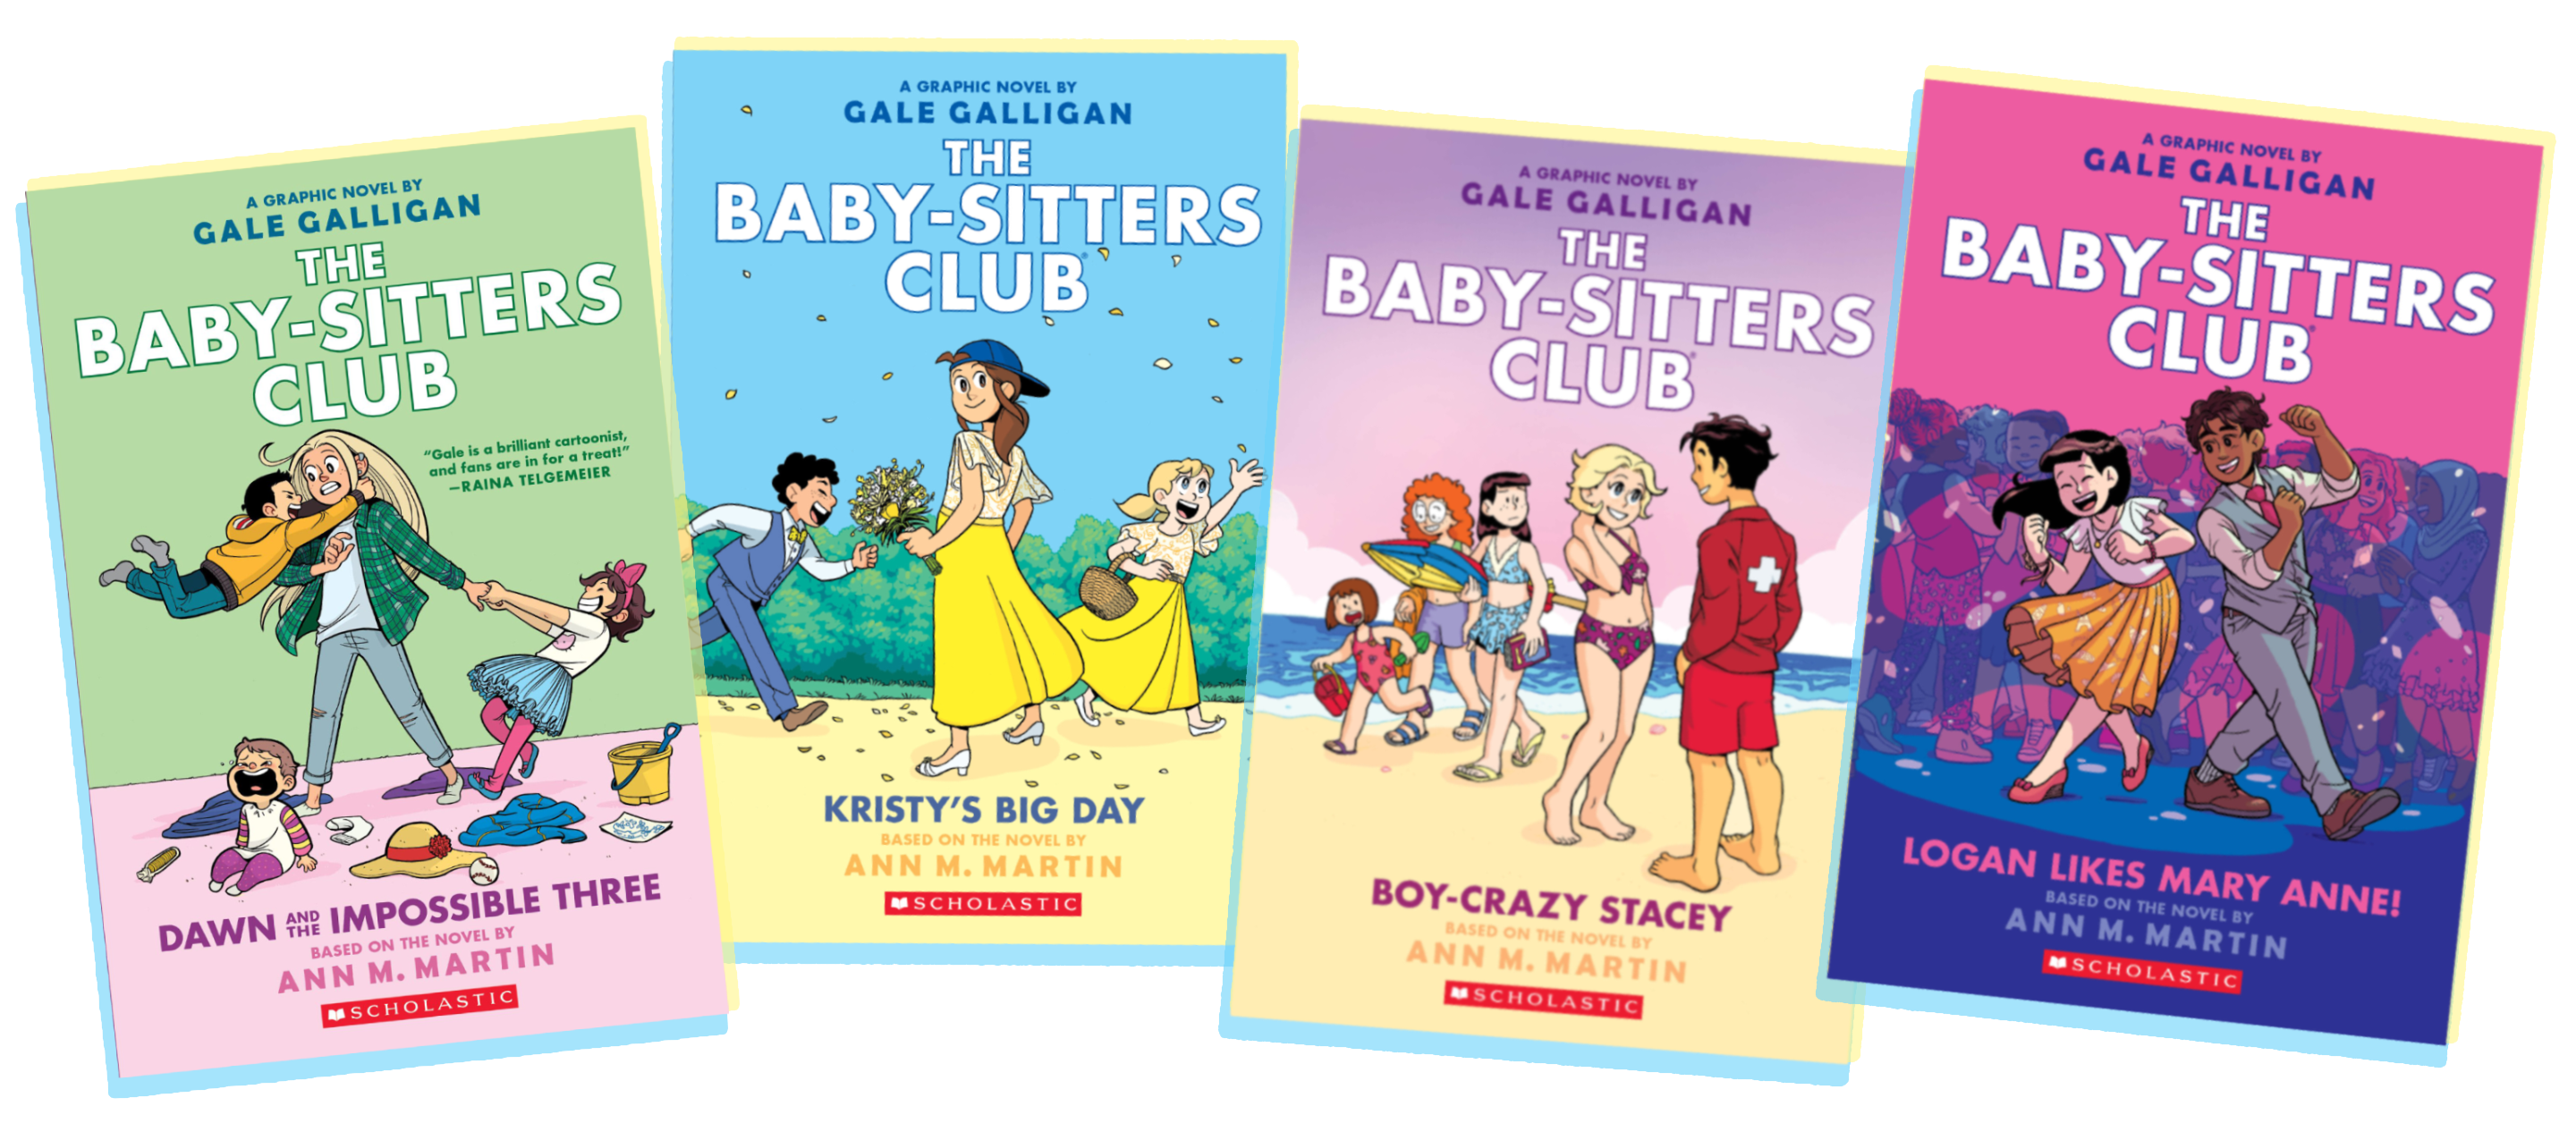 The covers of Baby-Sitters Club Graphix volumes 5 through 8 side by side.